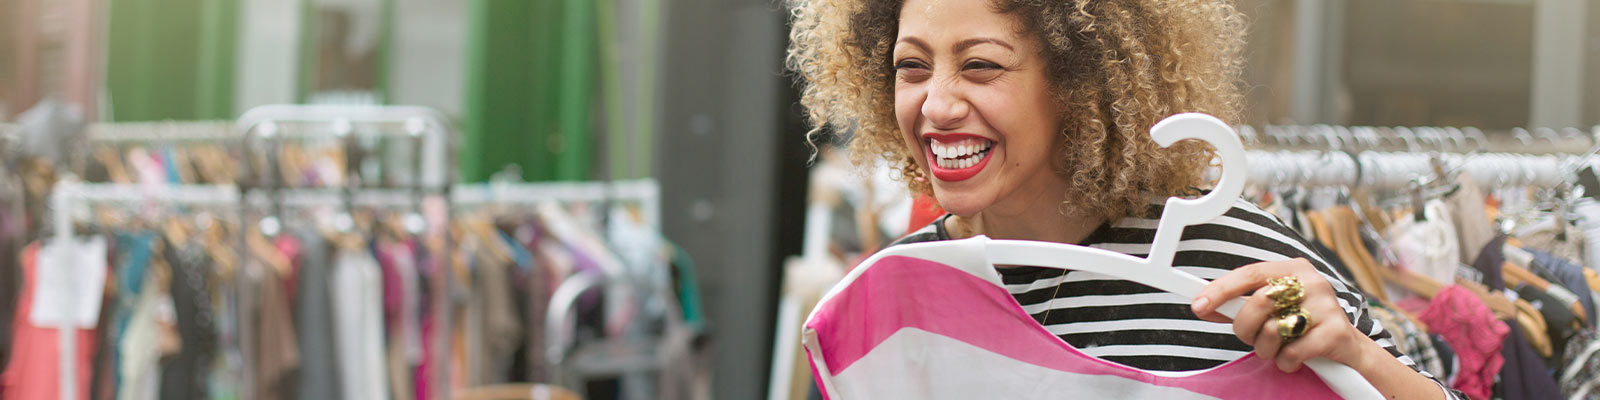 Woman holding shirt laughing in clothing store